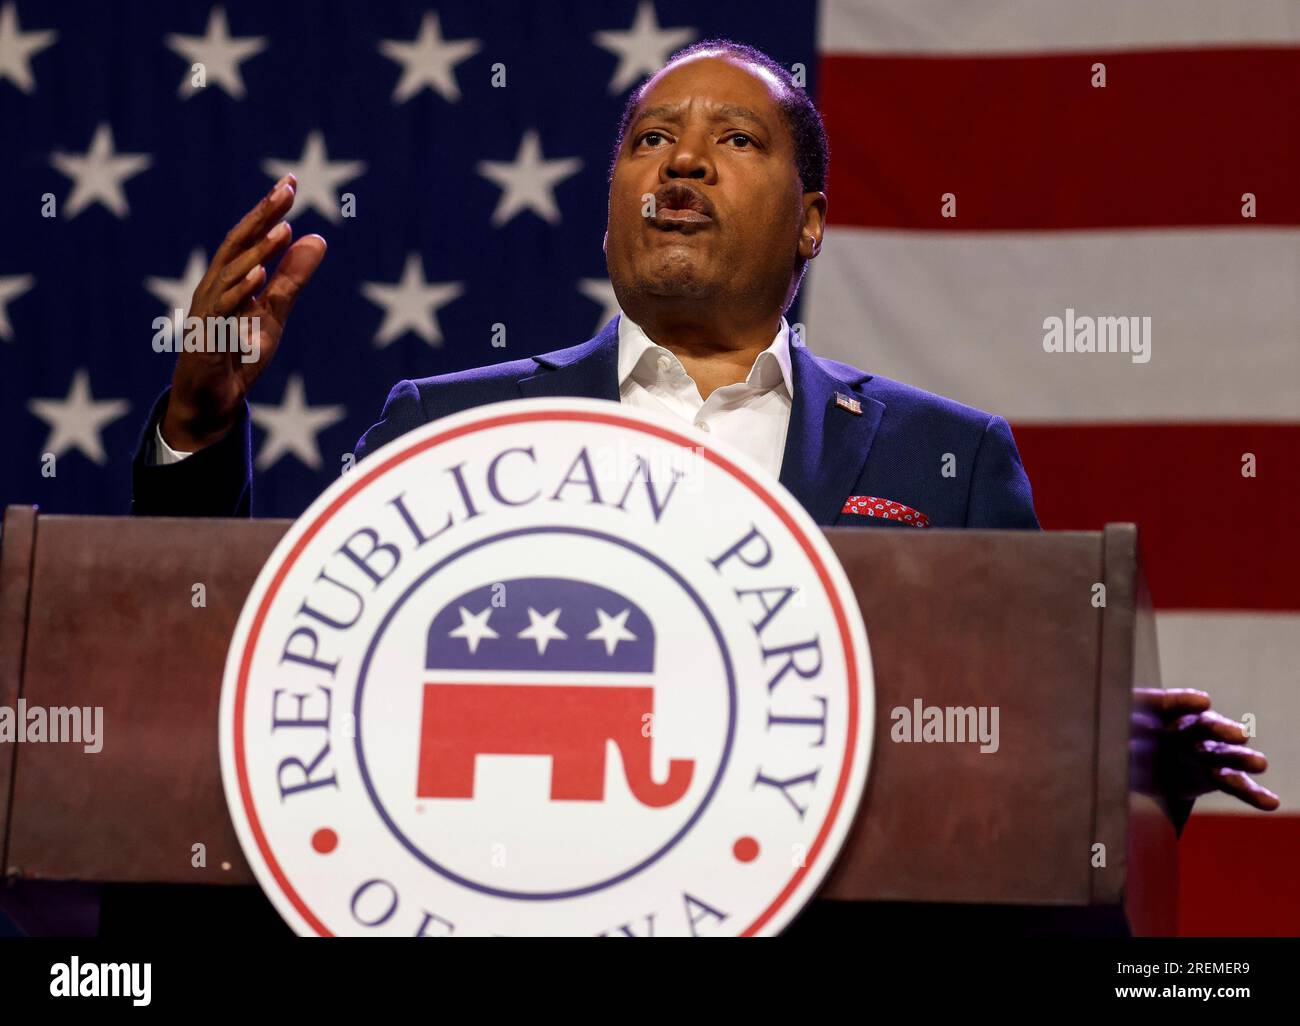 Des Moines, USA. 28th July, 2023. Republican presidential candidate Larry Elder speaks at the 2023 Republican Party of Iowa Lincoln Dinner in Des Moines, Iowa, Friday, July 28 2023. Republican candidates for US President made pitches for their respective candidacies at the gathering in Iowa which will hold the First-in-the-Nation Caucus. Photo by Tannen Maury/UPI Credit: UPI/Alamy Live News Stock Photo